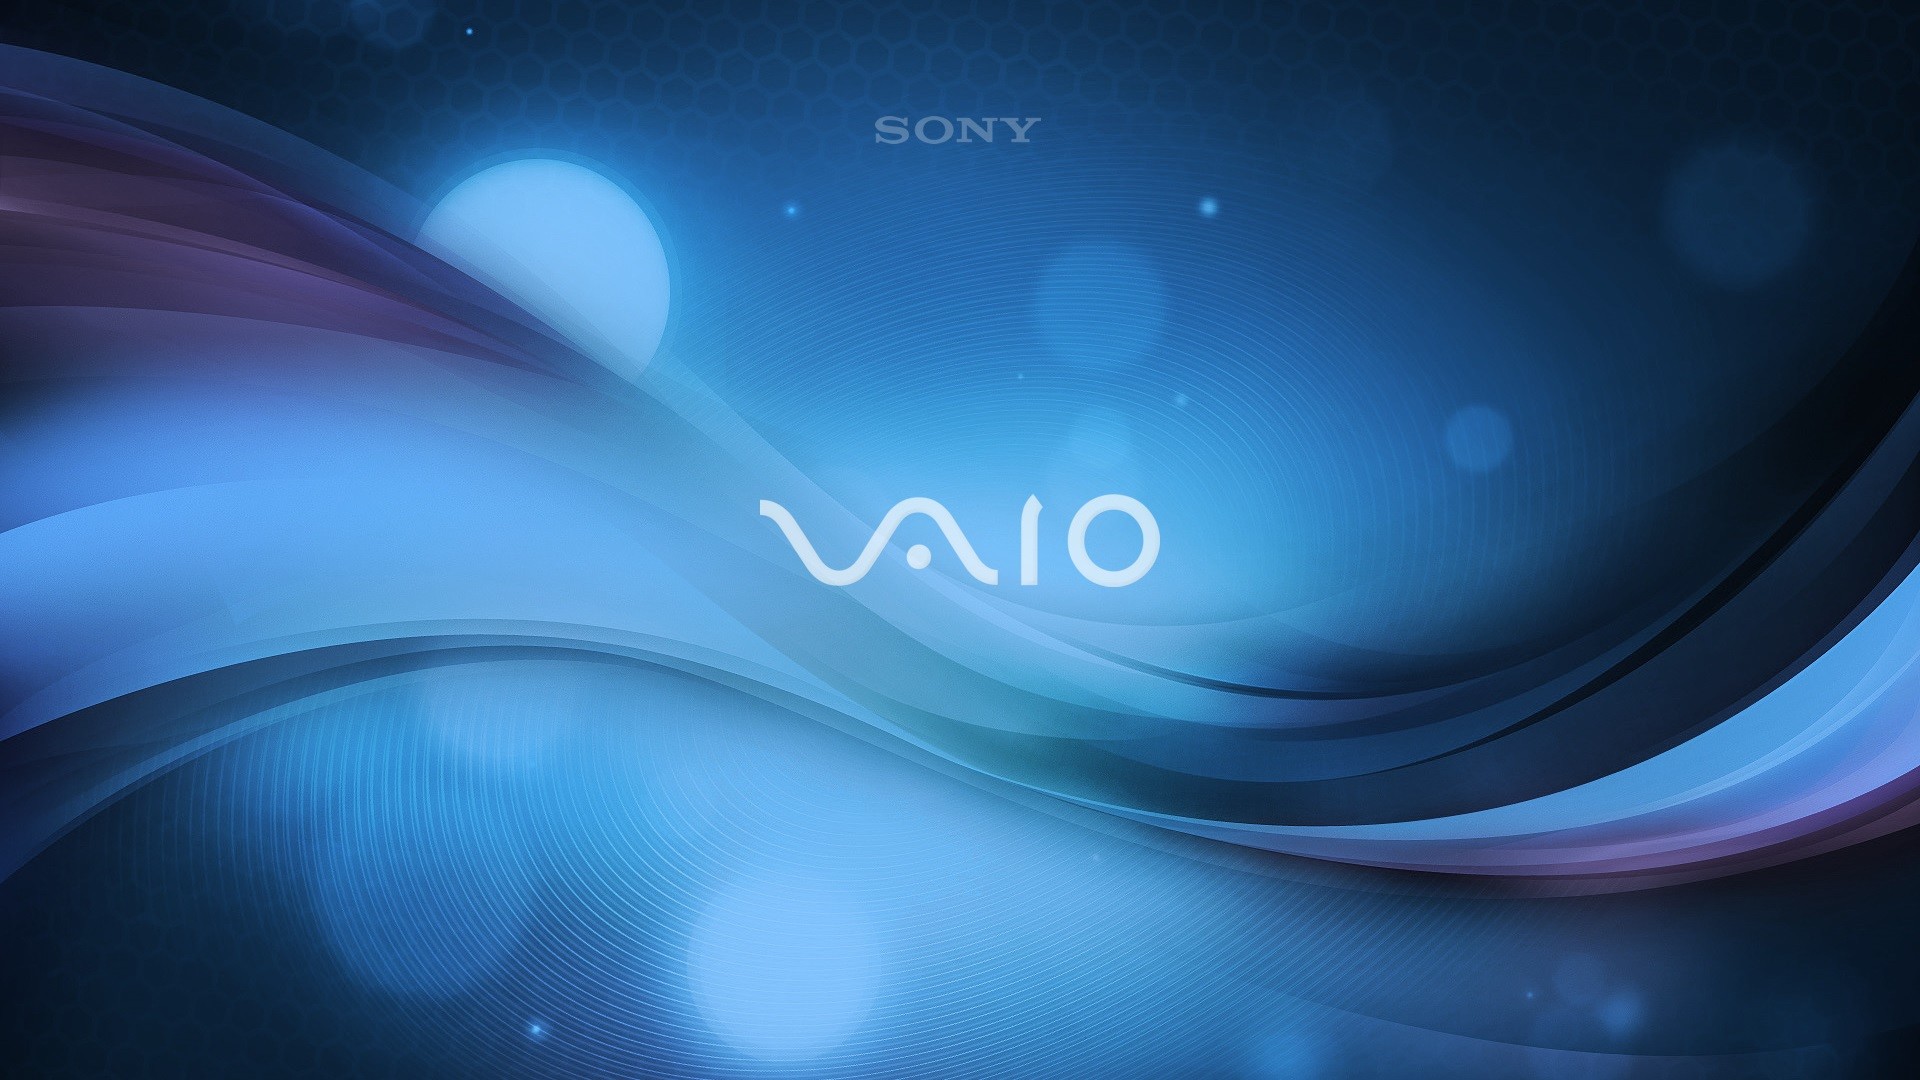 1920x1080 ... HD Sony Vaio Wallpapers & Vaio Backgrounds For Free Download ...